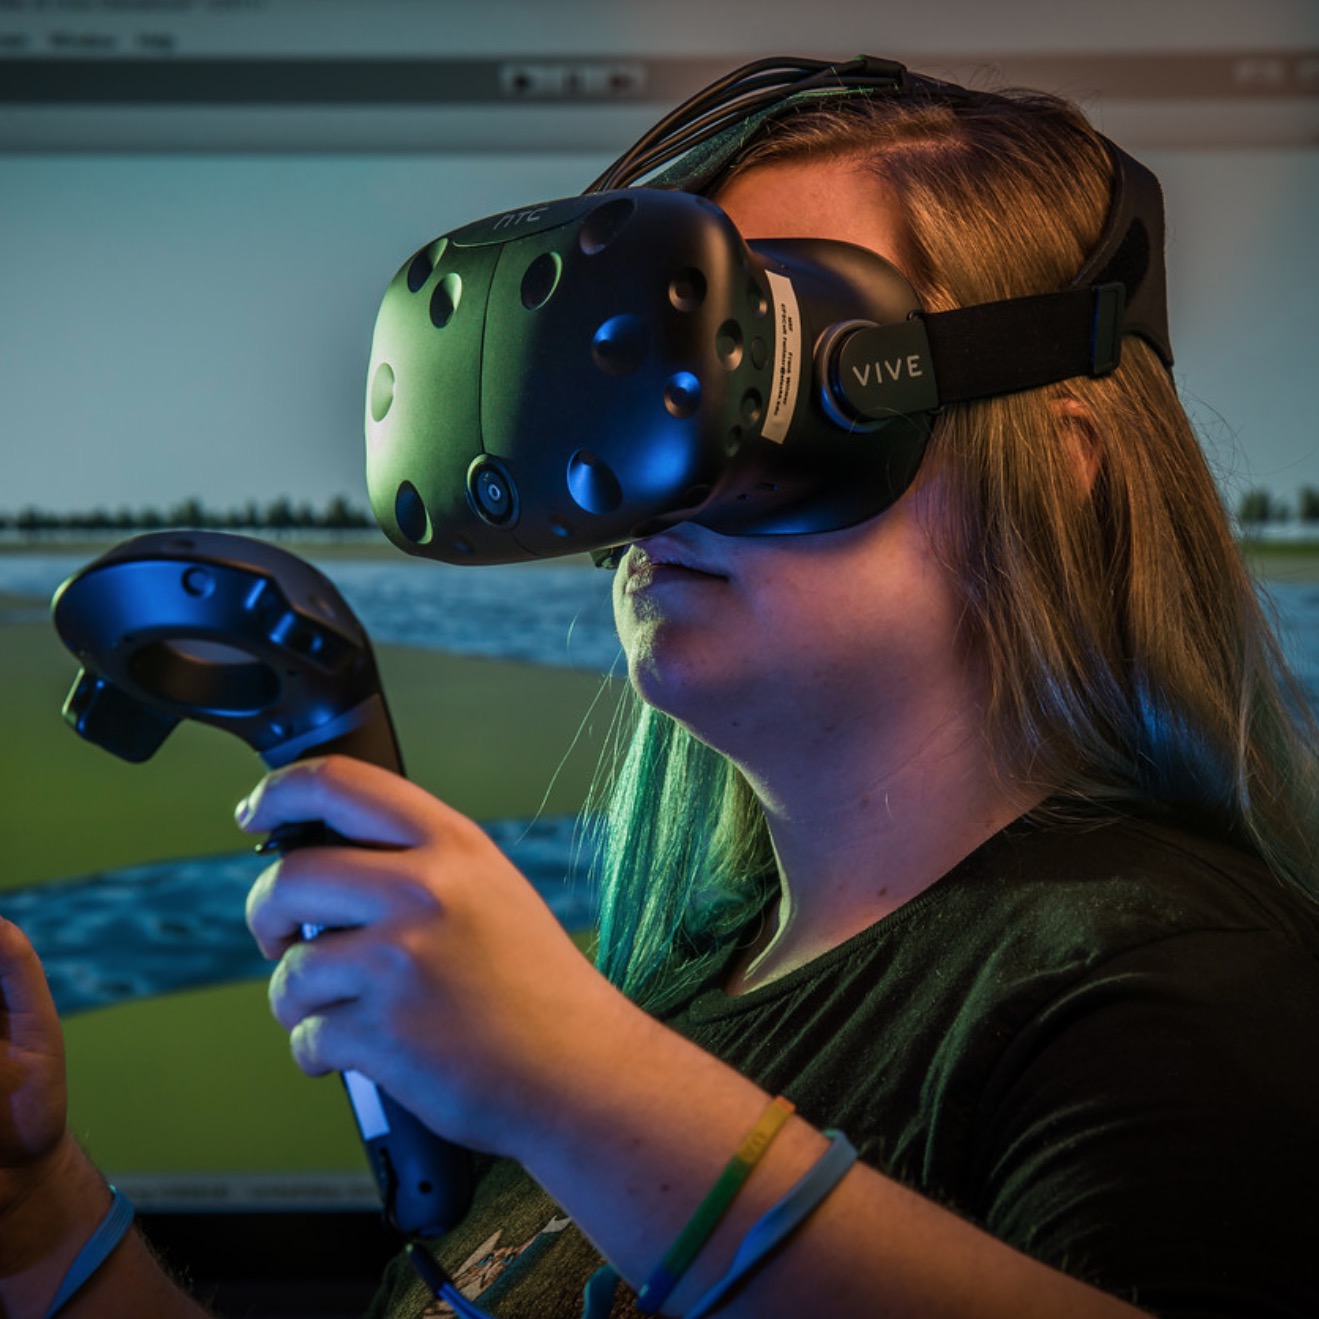 Student testing a virtual reality (VR) headset and hand controller